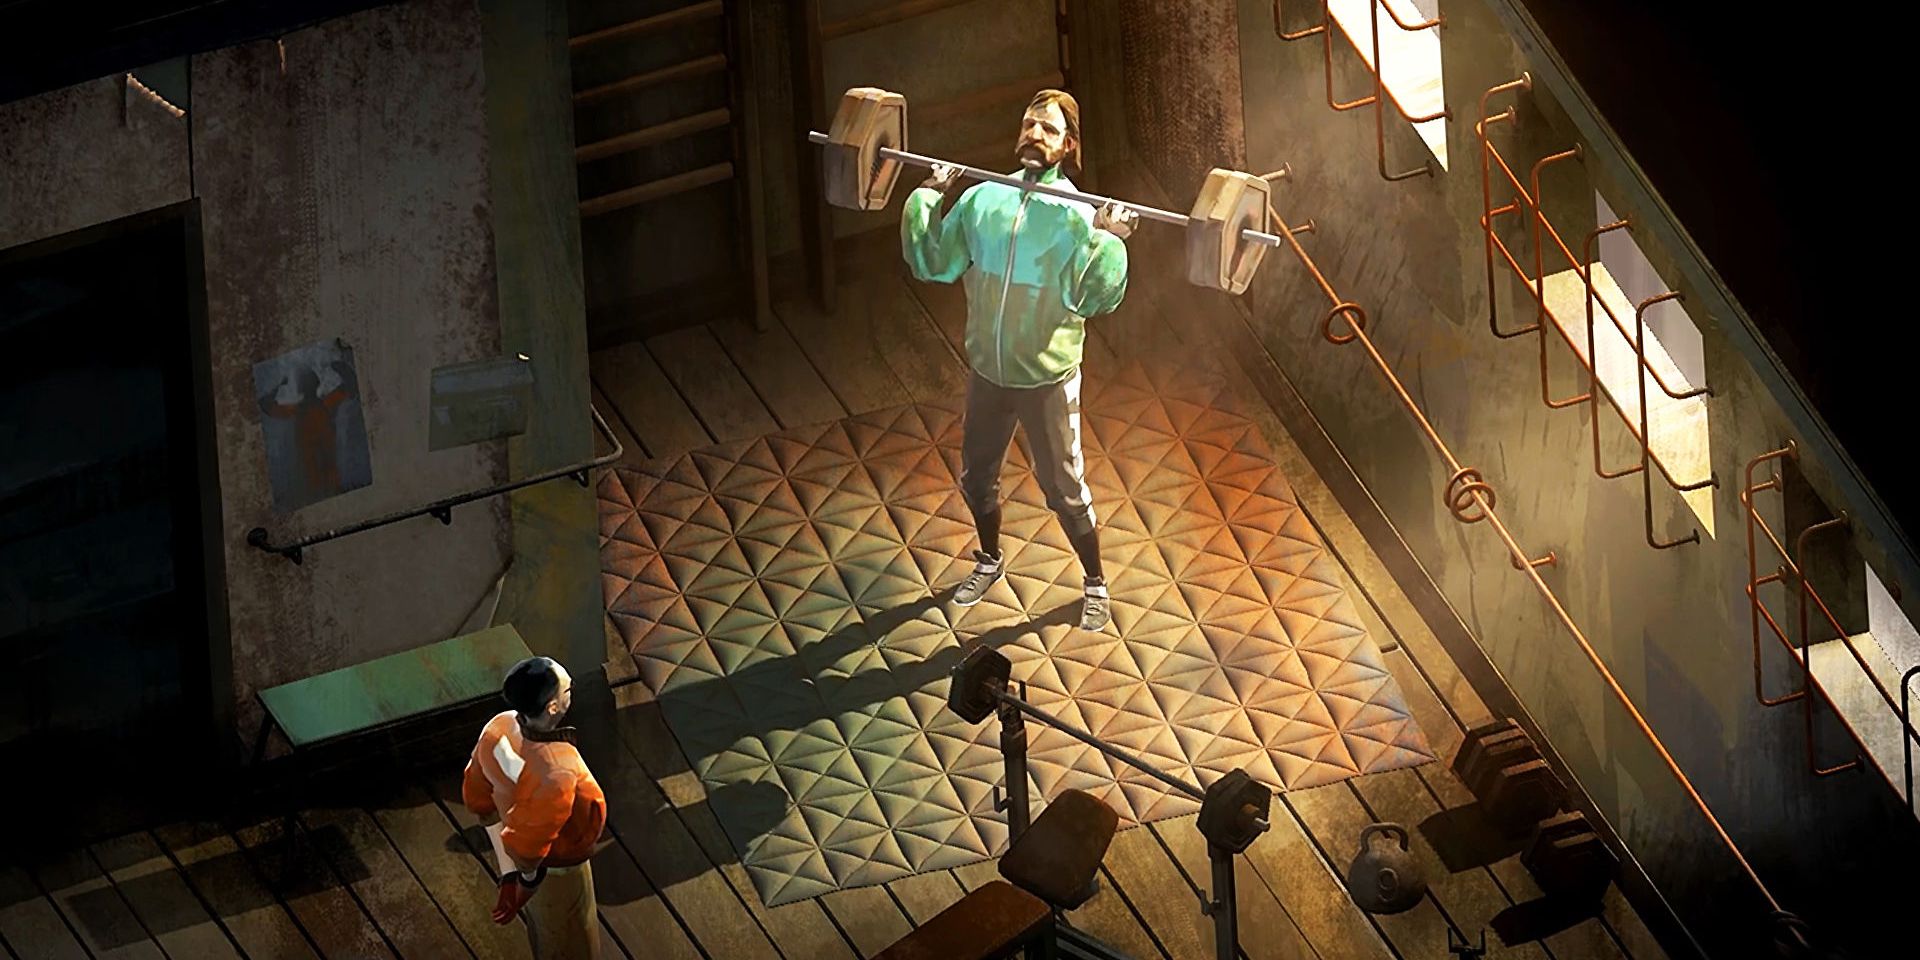 An image of a character from Disco Elysium lifting weights